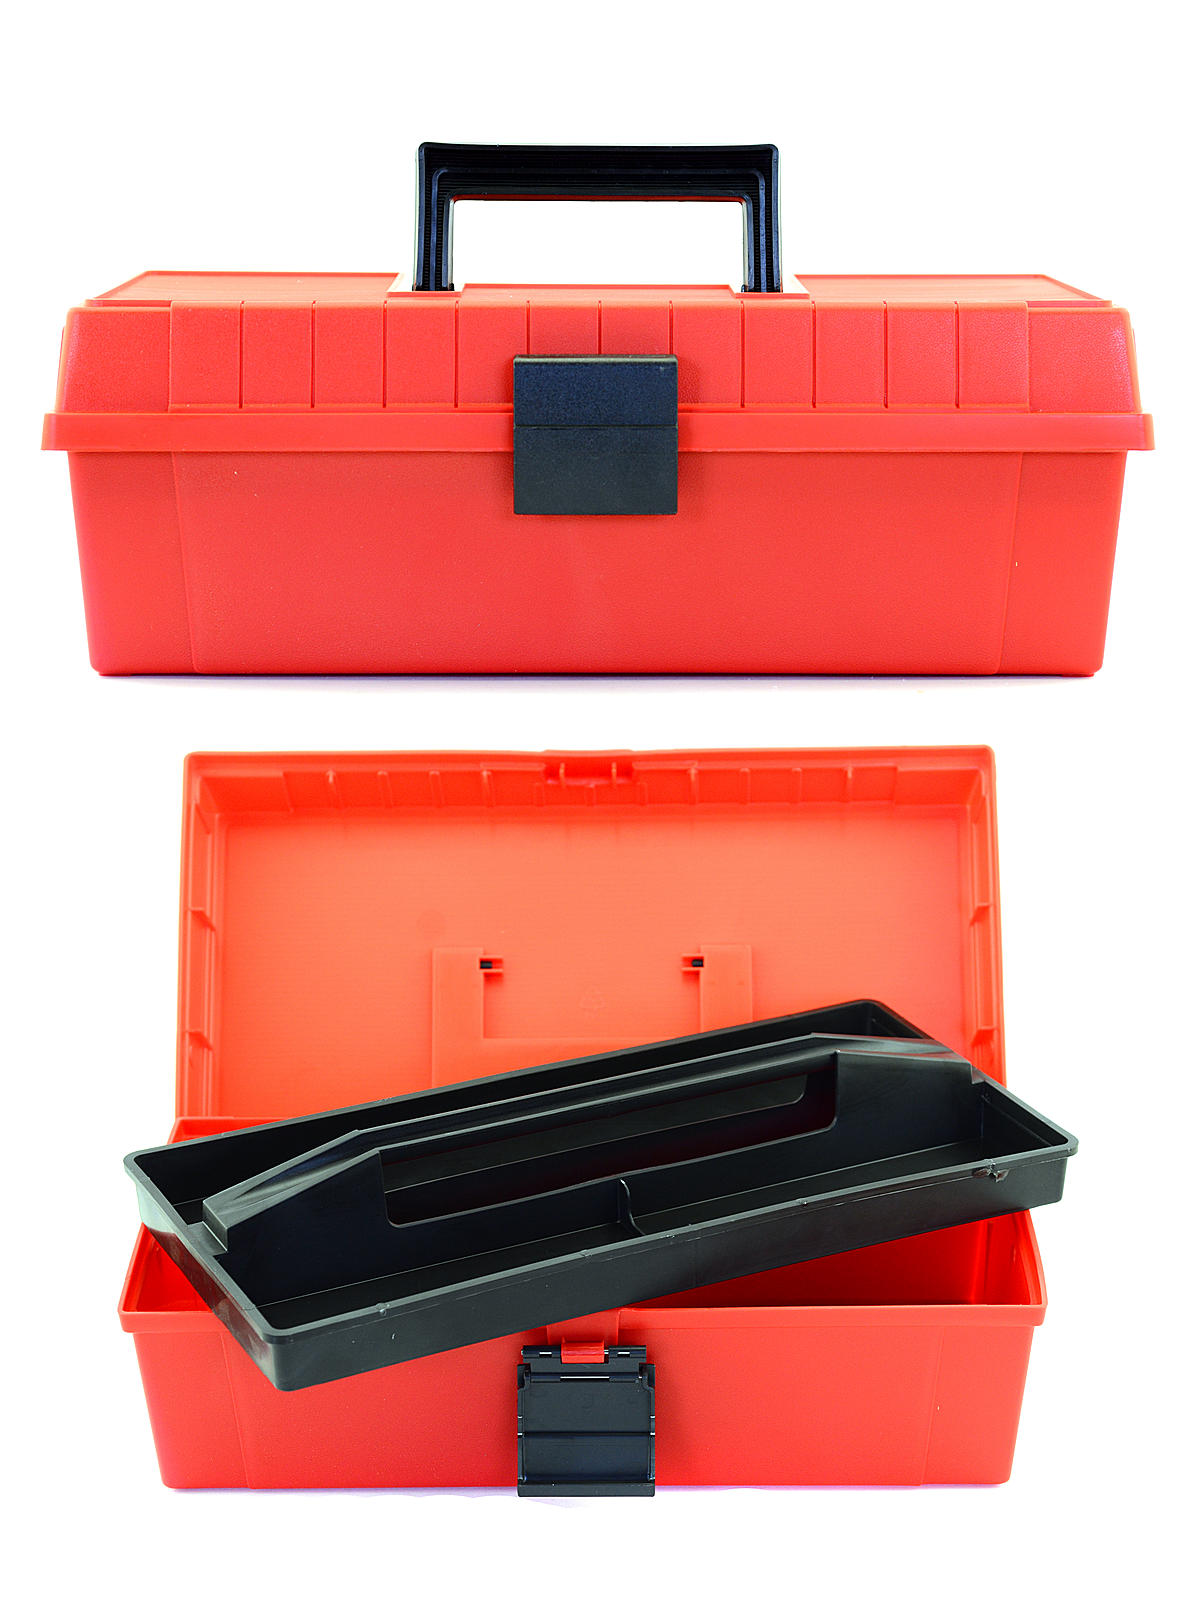 15 Inch Utility Box With Lift-out Tray Utility Box